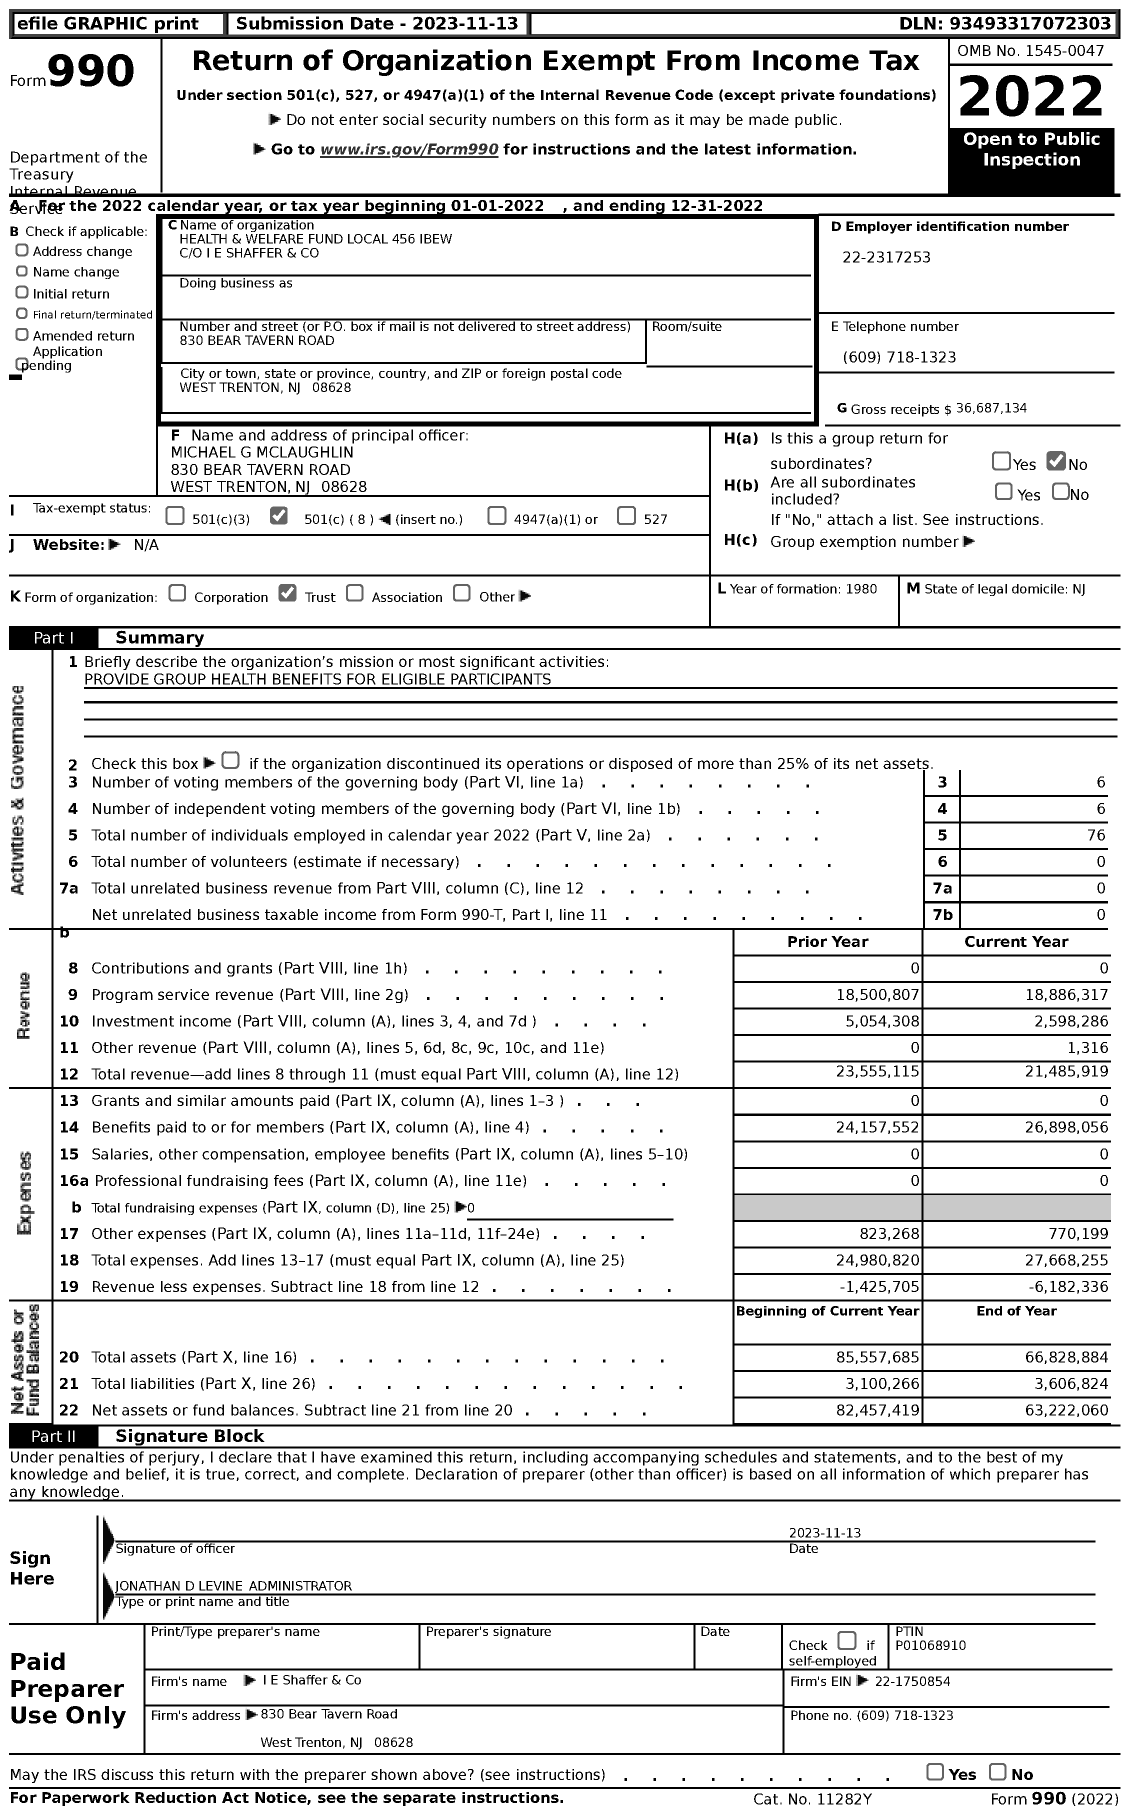 Image of first page of 2022 Form 990 for Health and Welfare Fund Local 456 IBEW